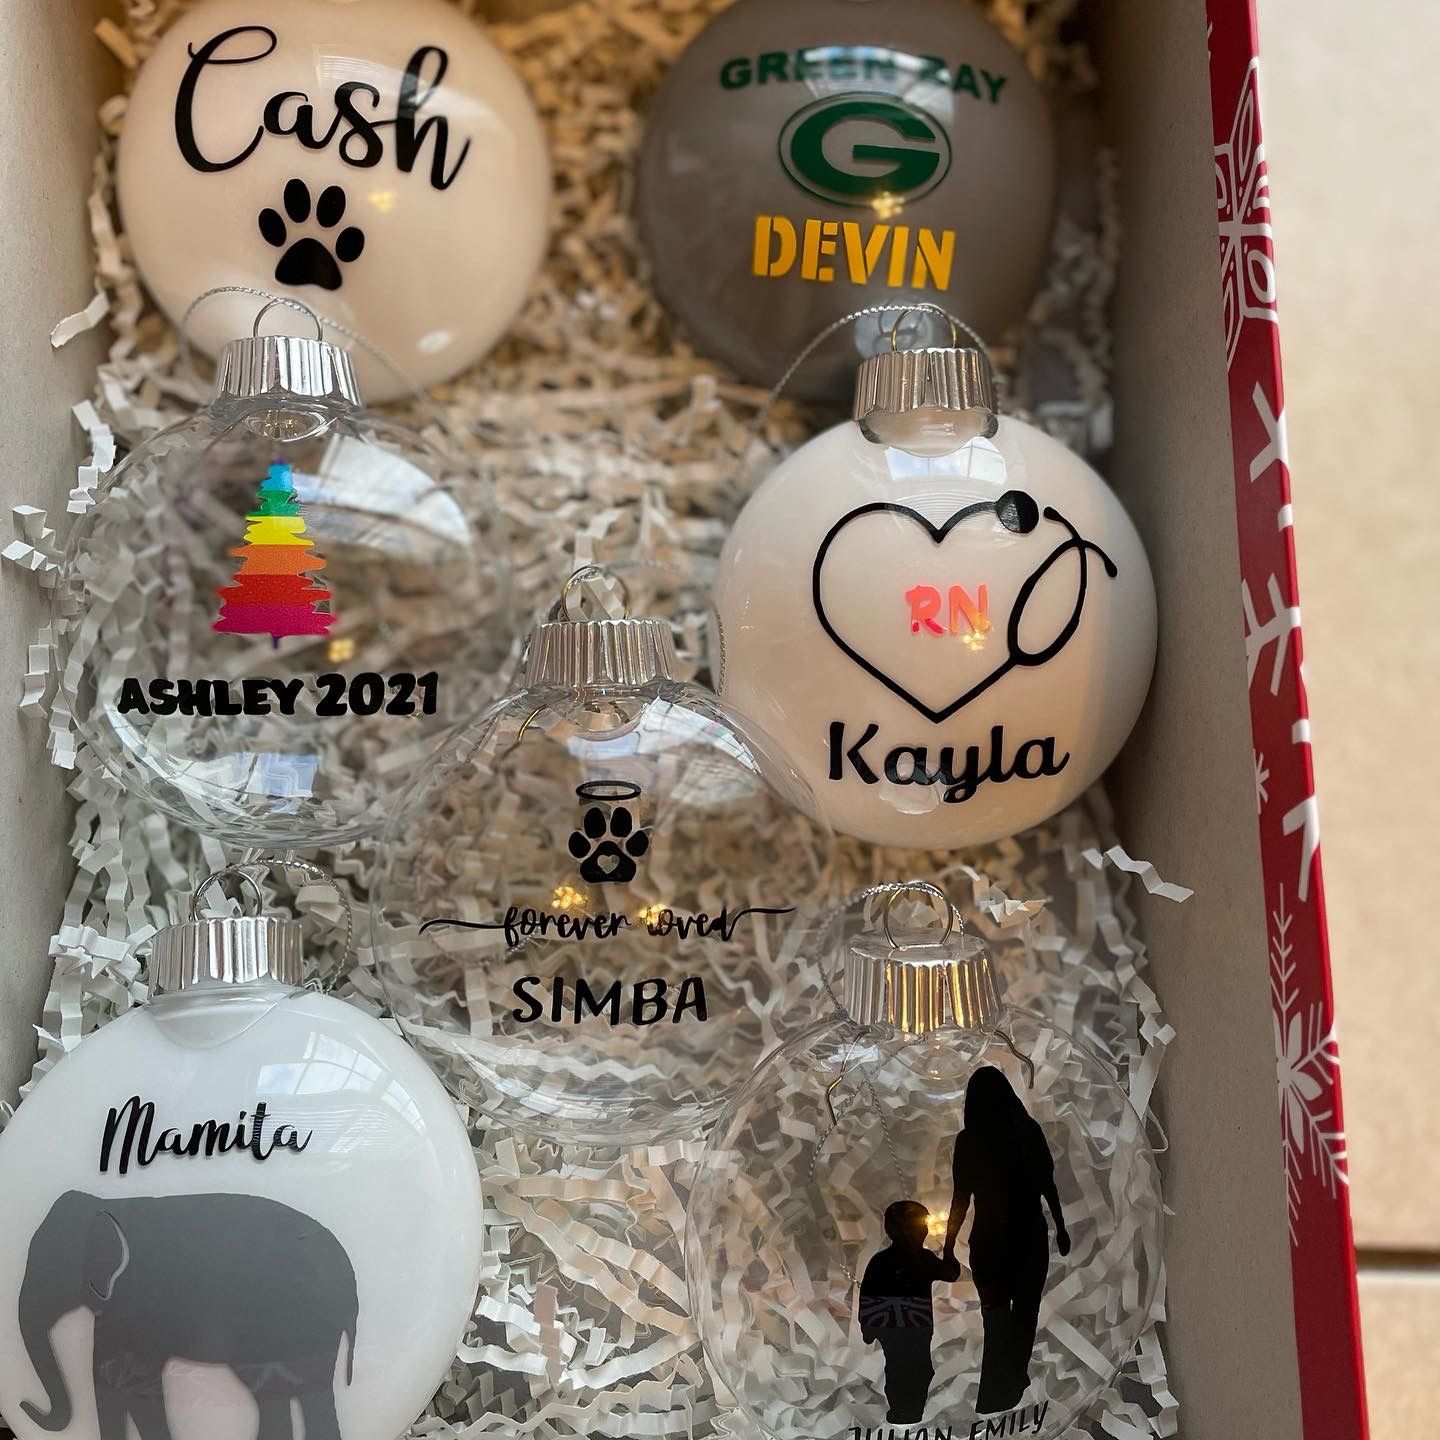 Christmas Ornaments Personalized 